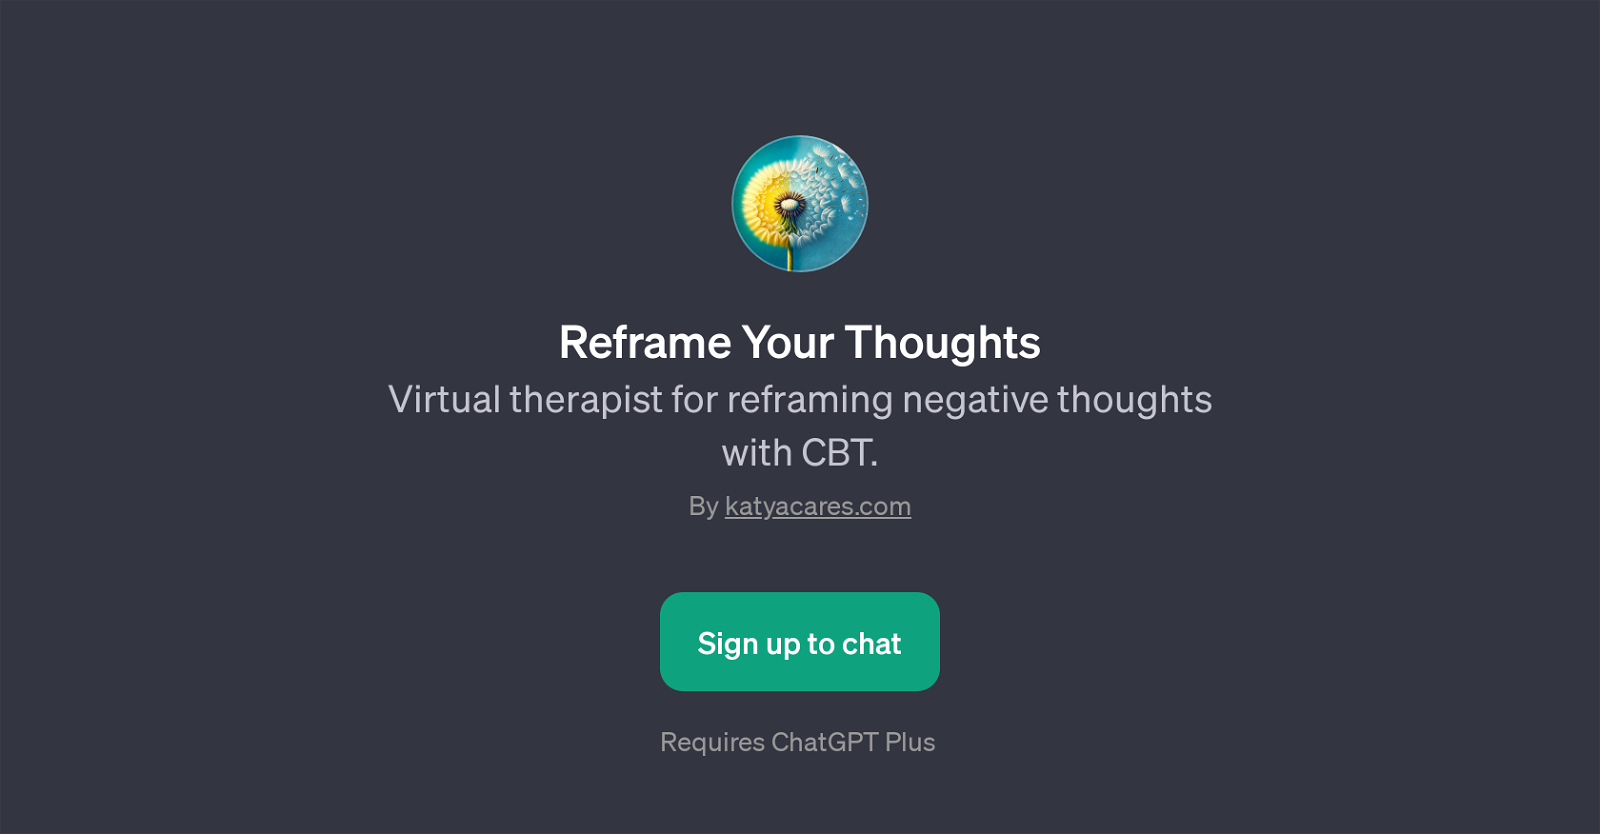 Reframe Your Thoughts website